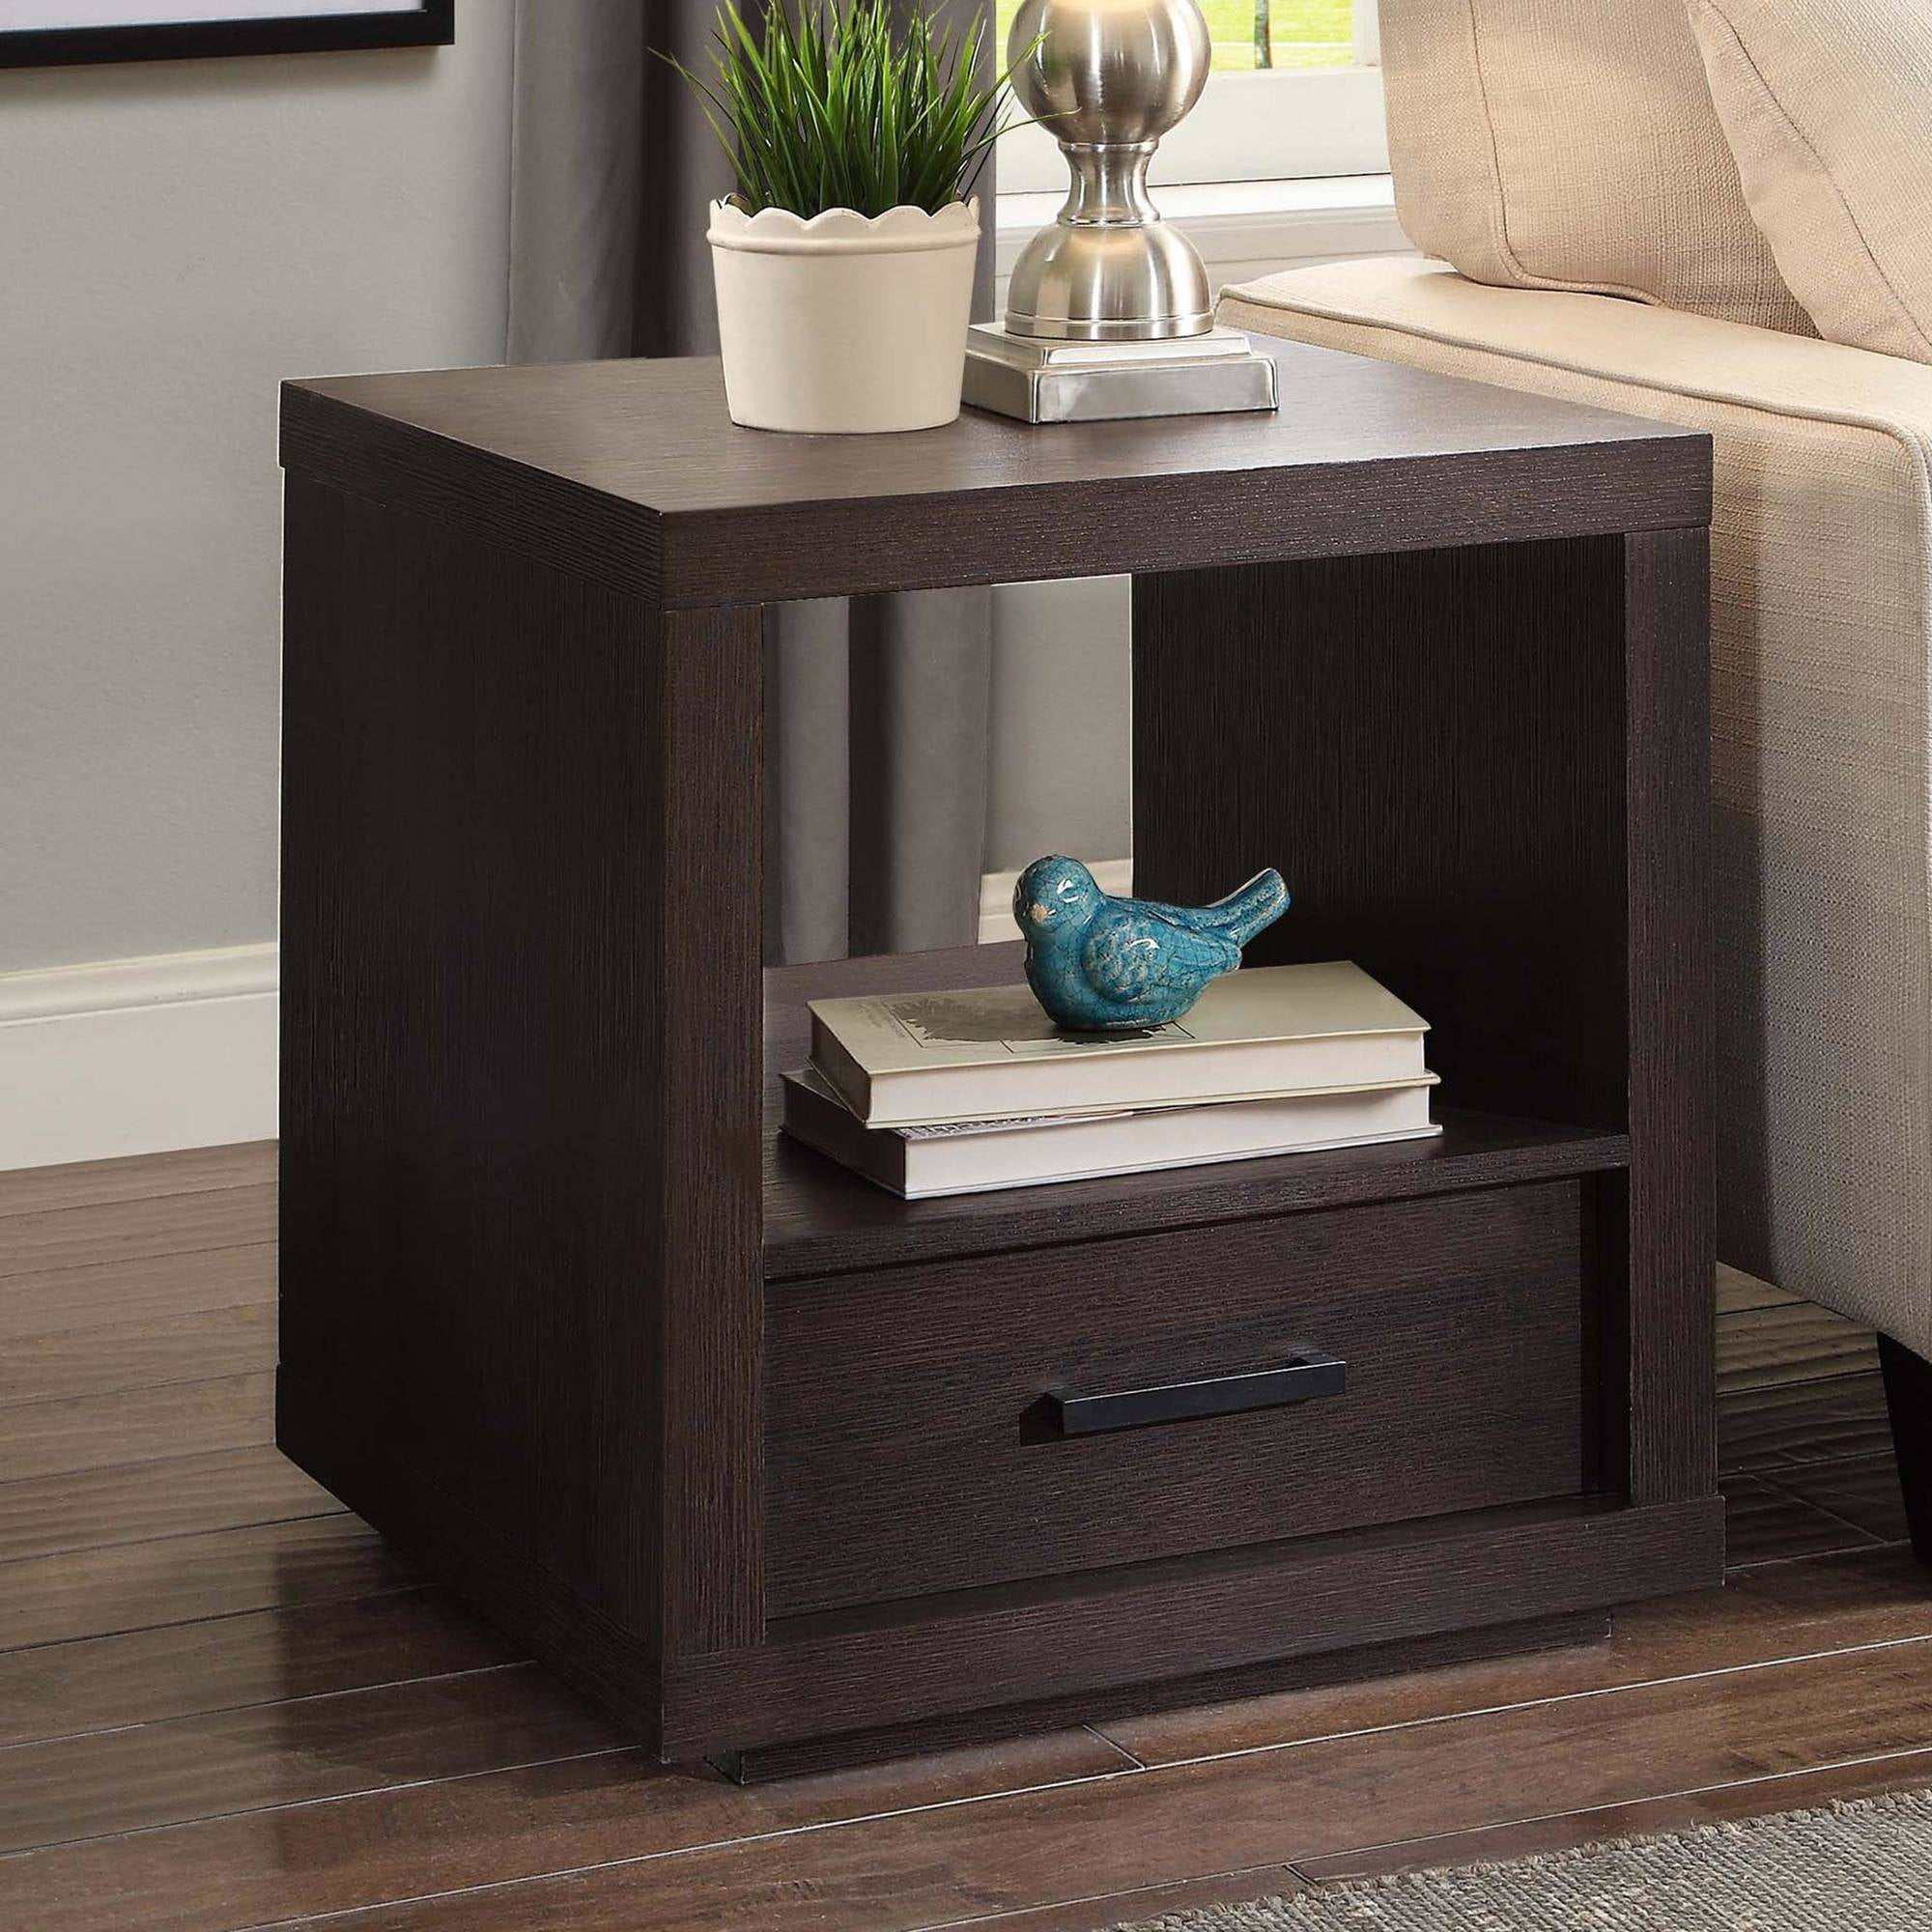 Better Homes & Gardens Steele End Table With Drawer, Espresso Finish - Walmart.com